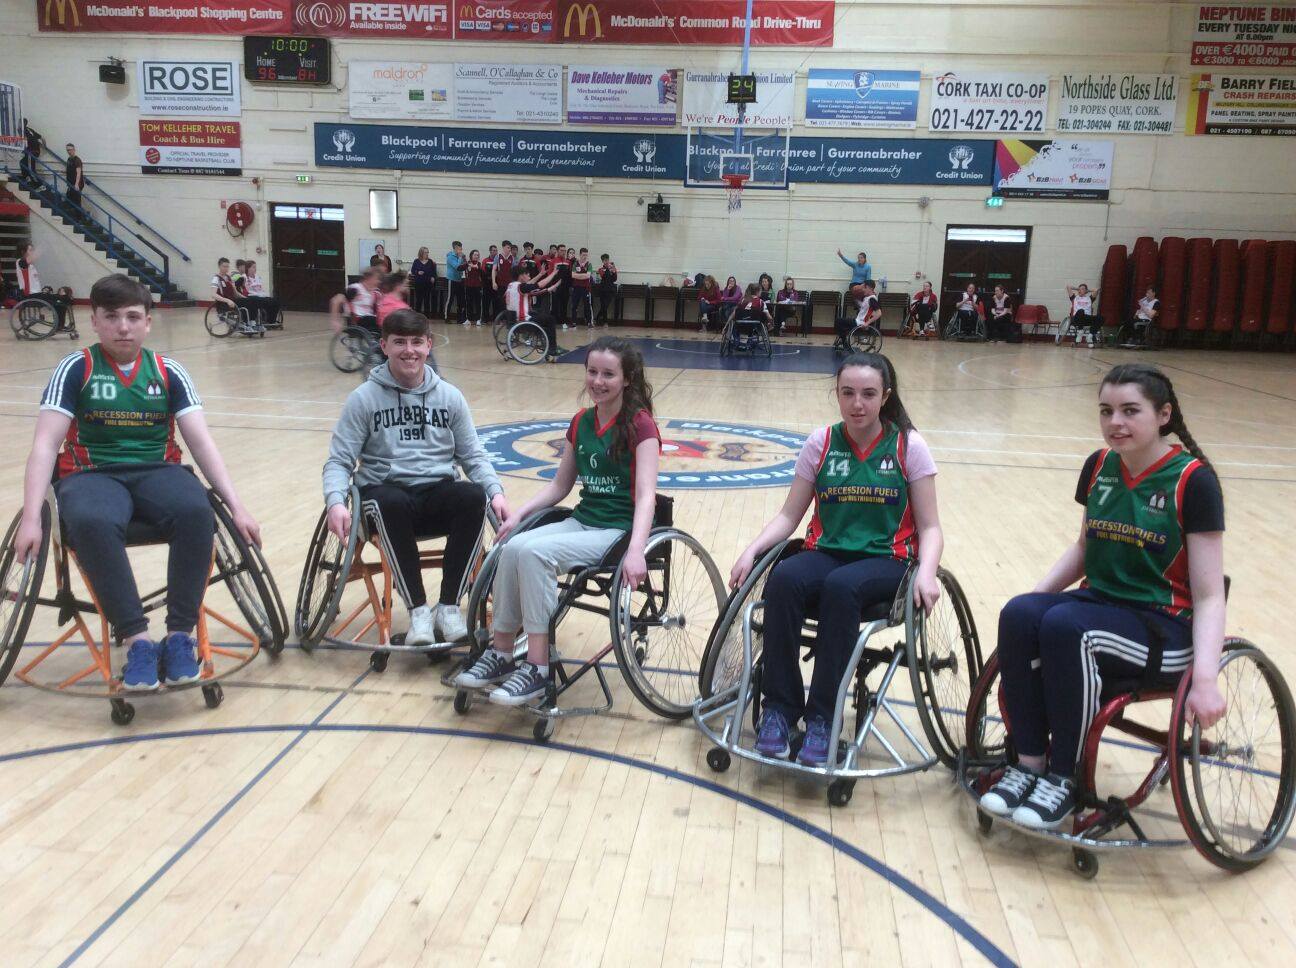 21st April 2016: Desmond College TY Students compete in Munster Wheelchair Basketball Competition. Active Schools Week 2016. #ActiveThursday